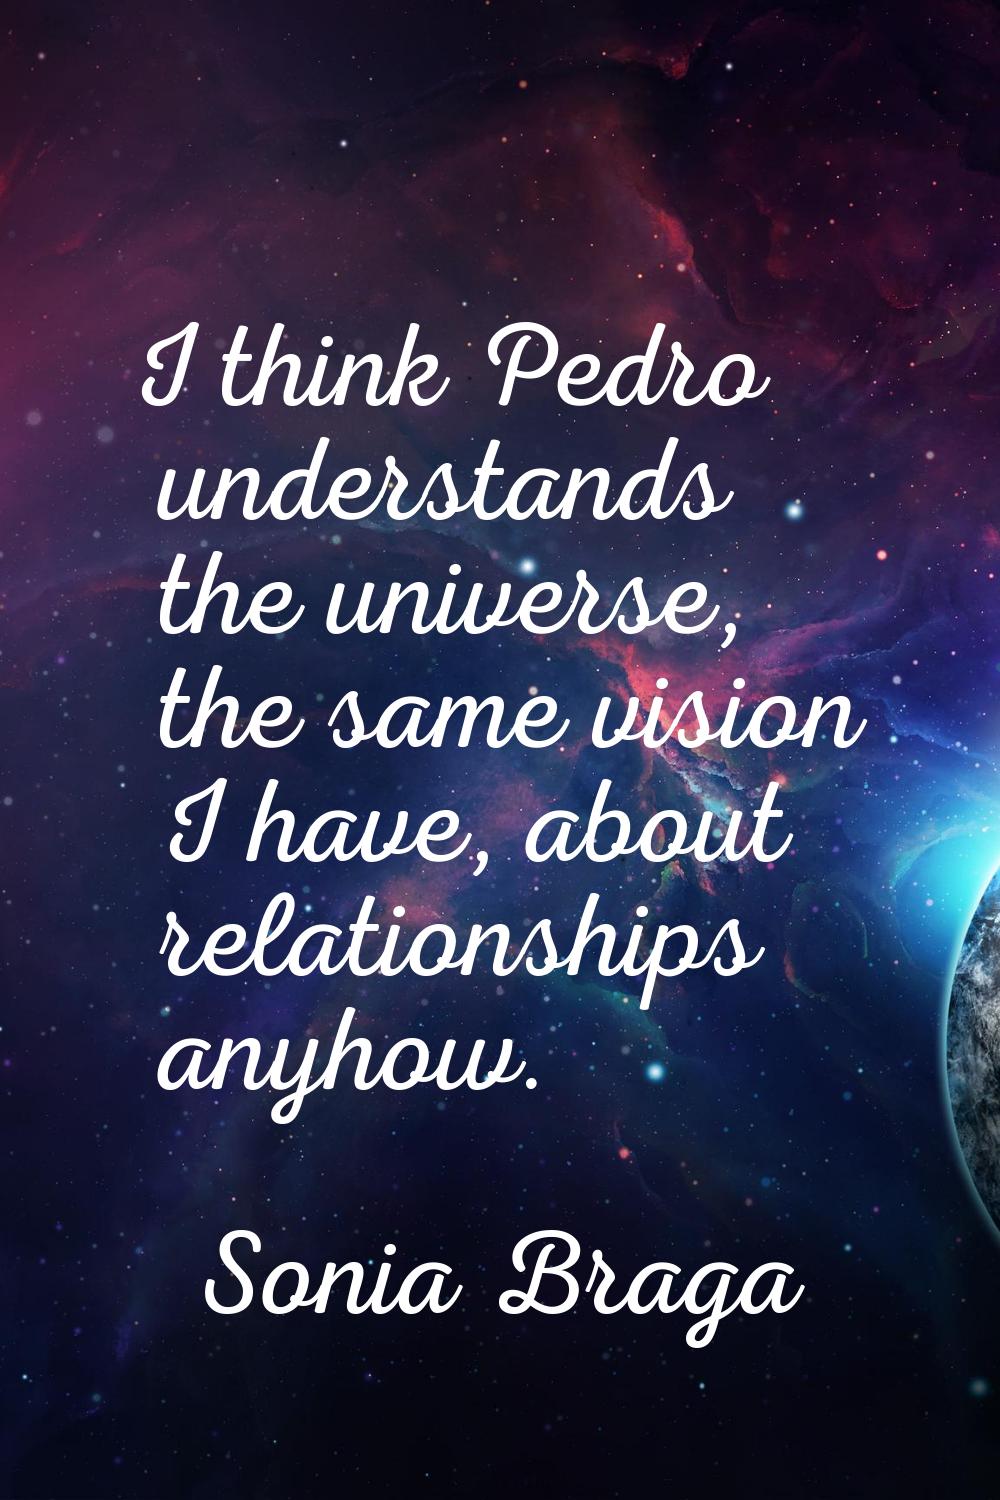 I think Pedro understands the universe, the same vision I have, about relationships anyhow.